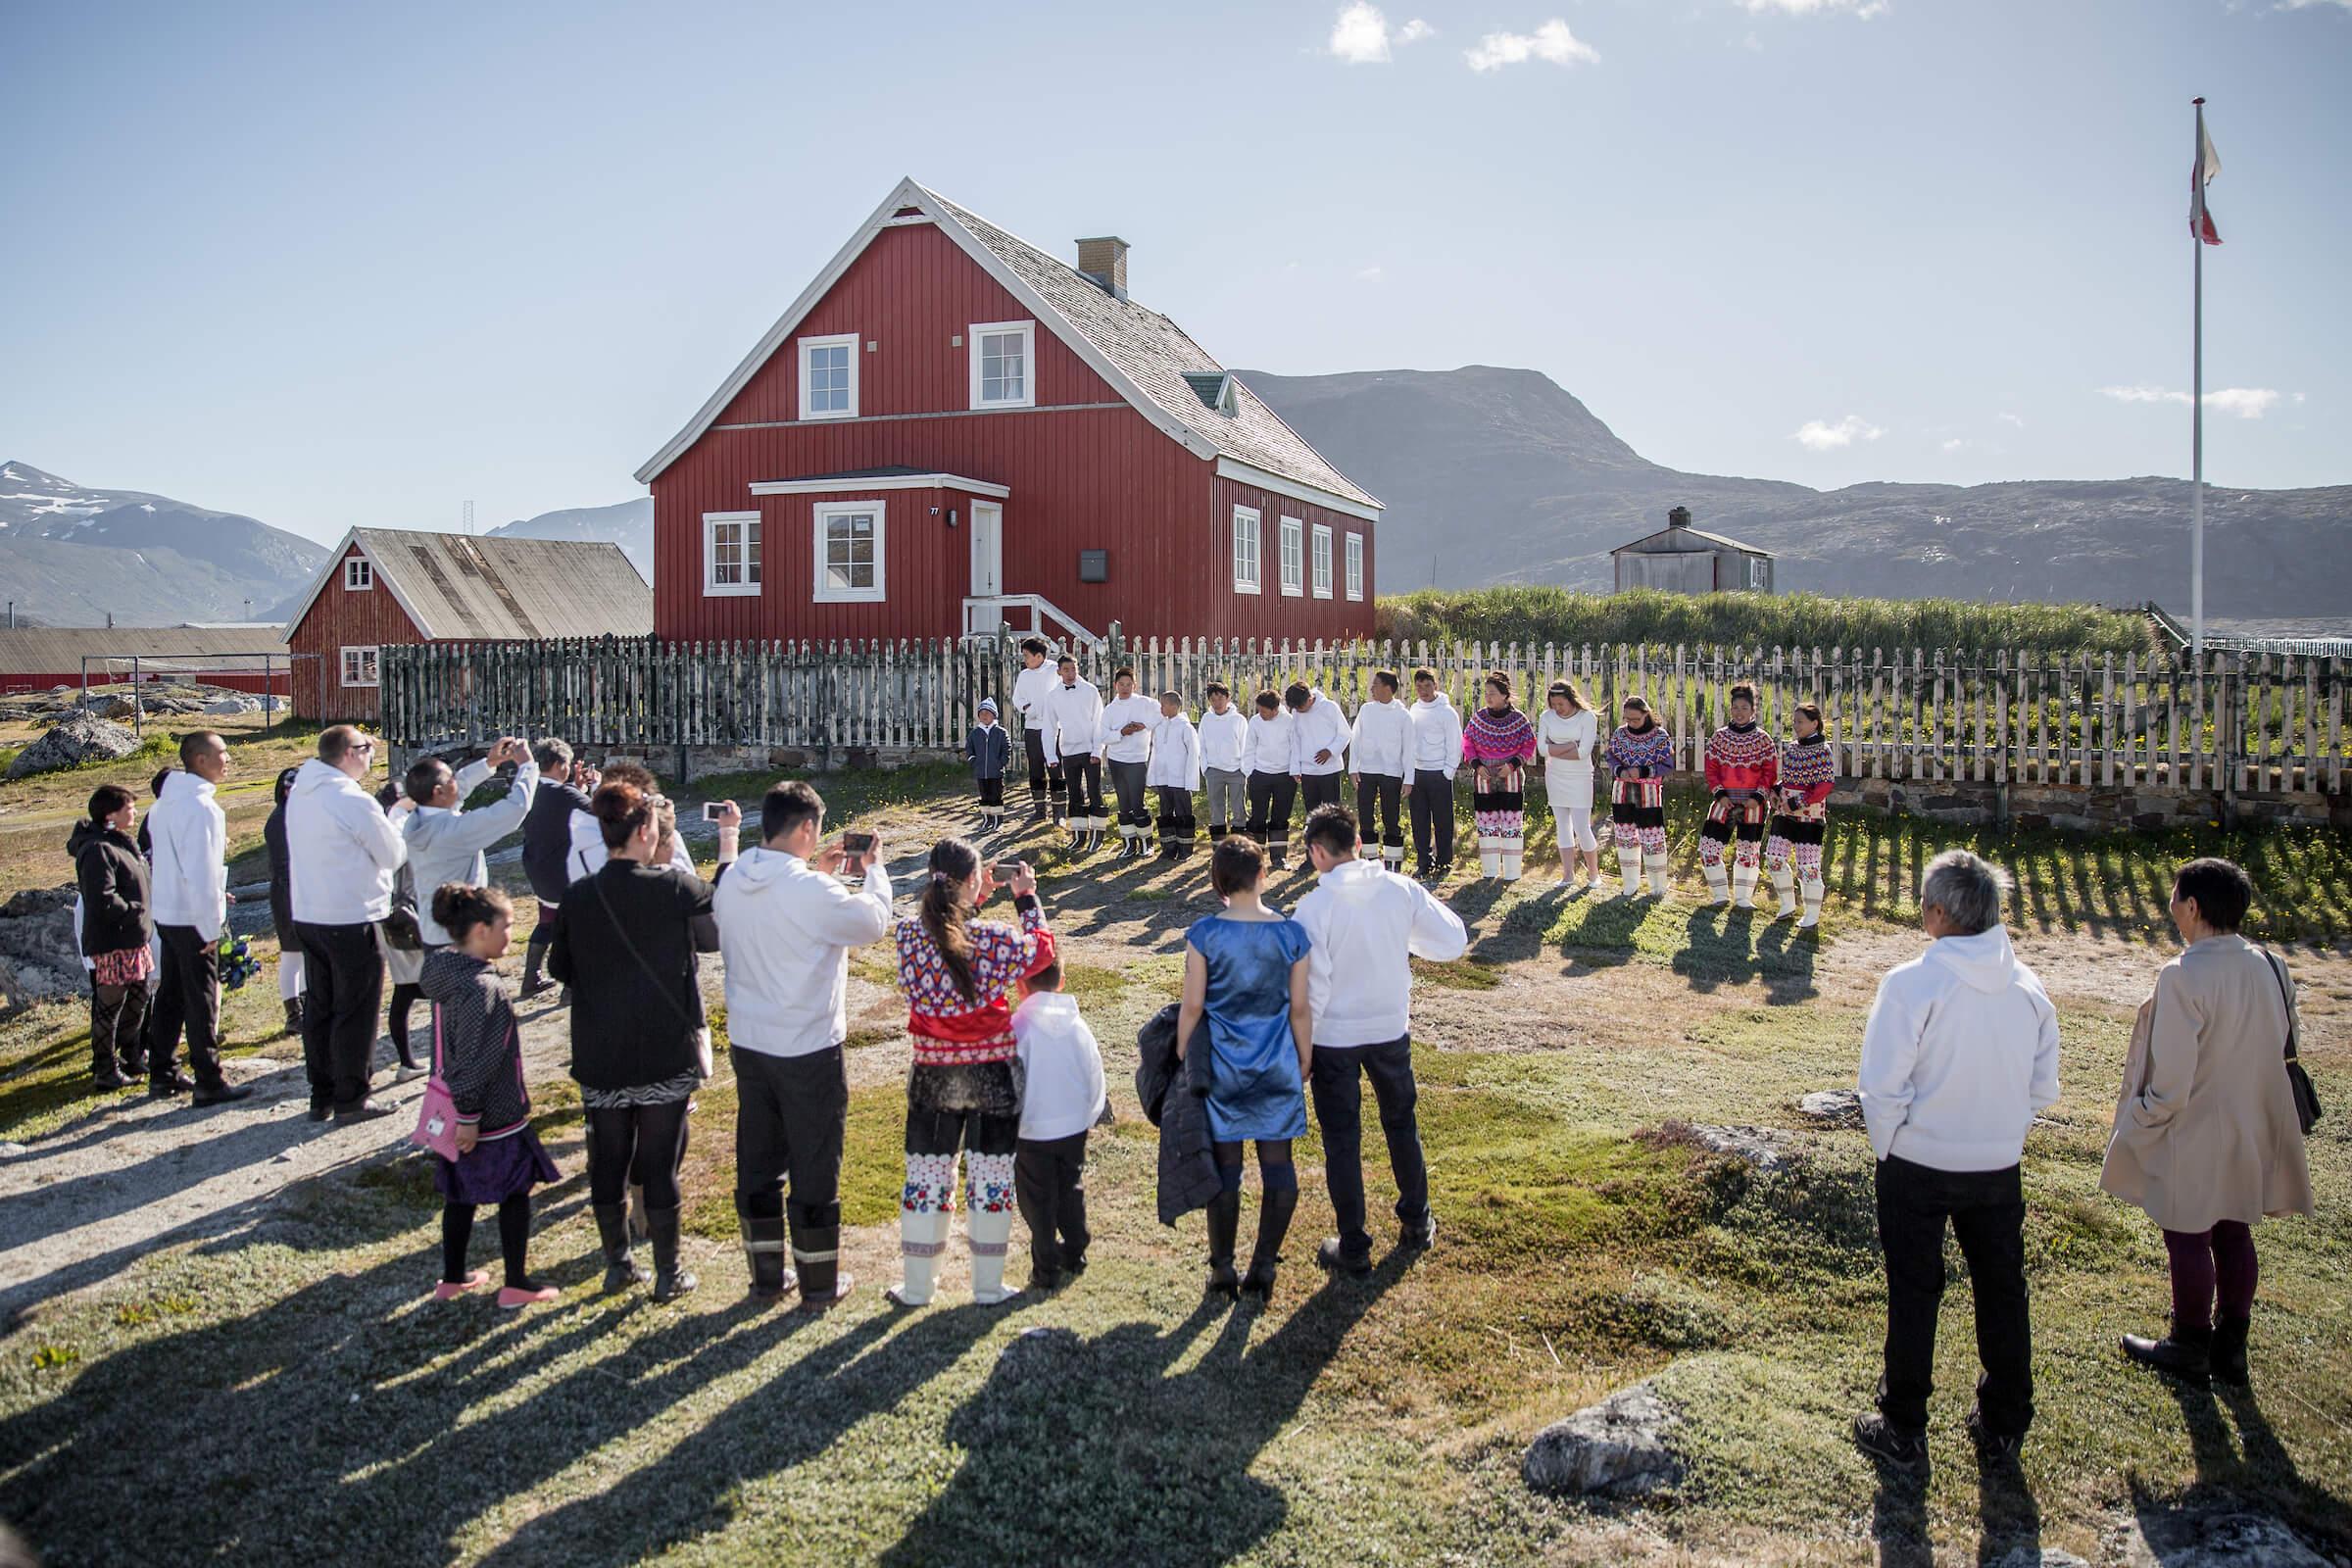 Kids from Nanortalik in South Greenland lining up for their day of Conformation at the church. Photo by Mads Pihl.